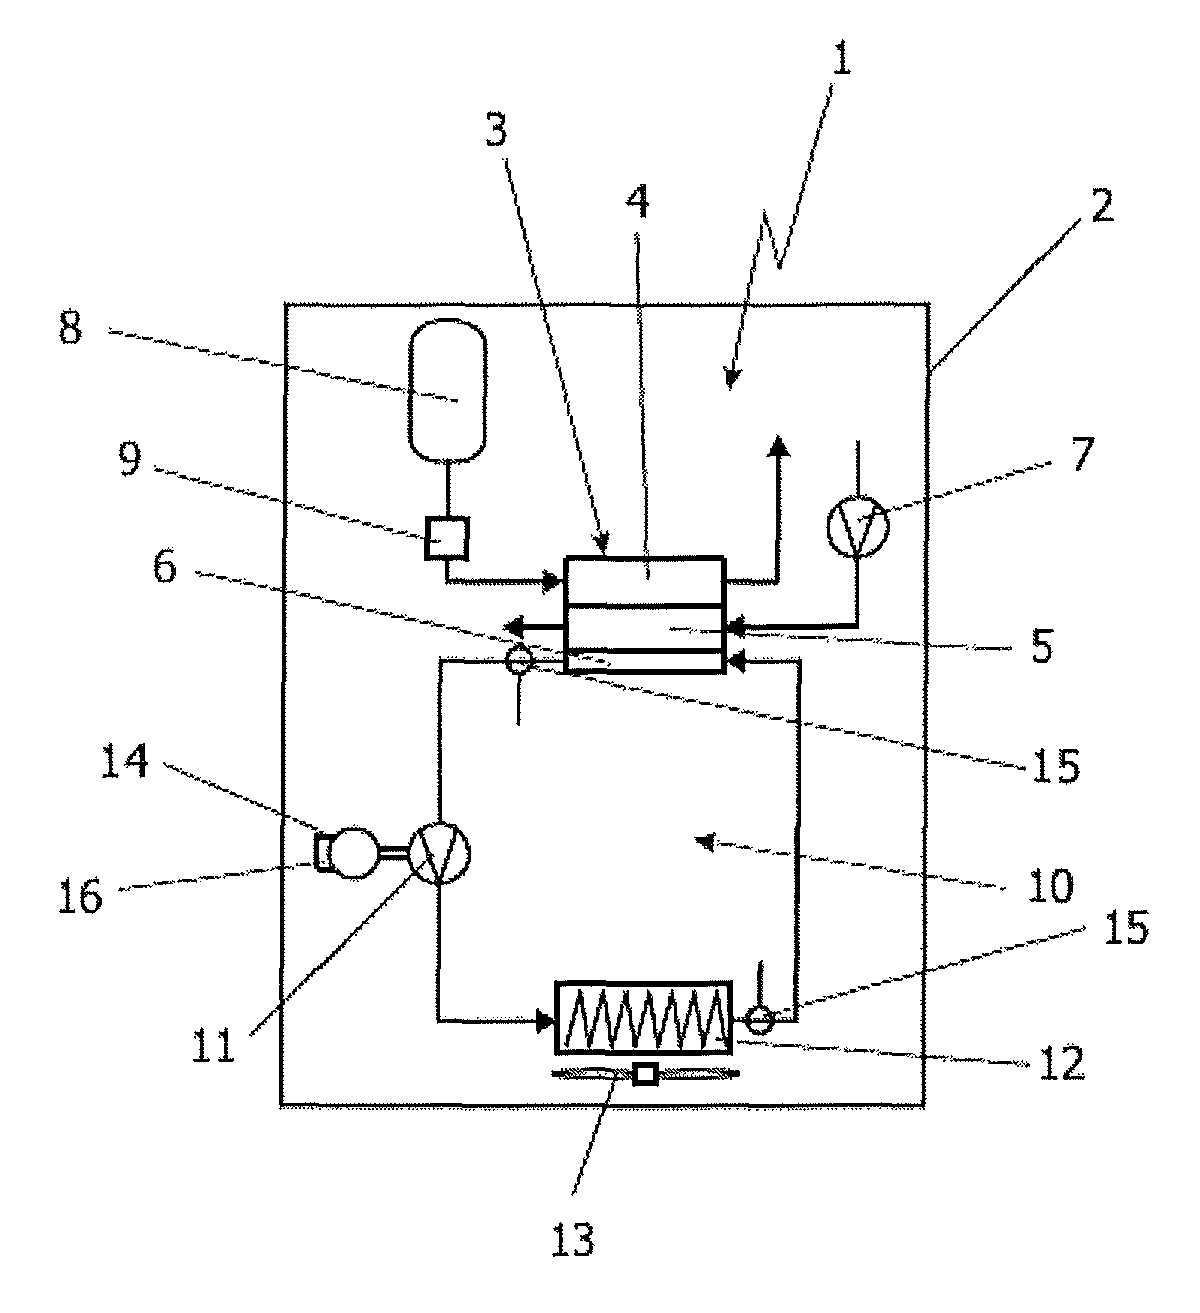 Method for cooling a fuel cell